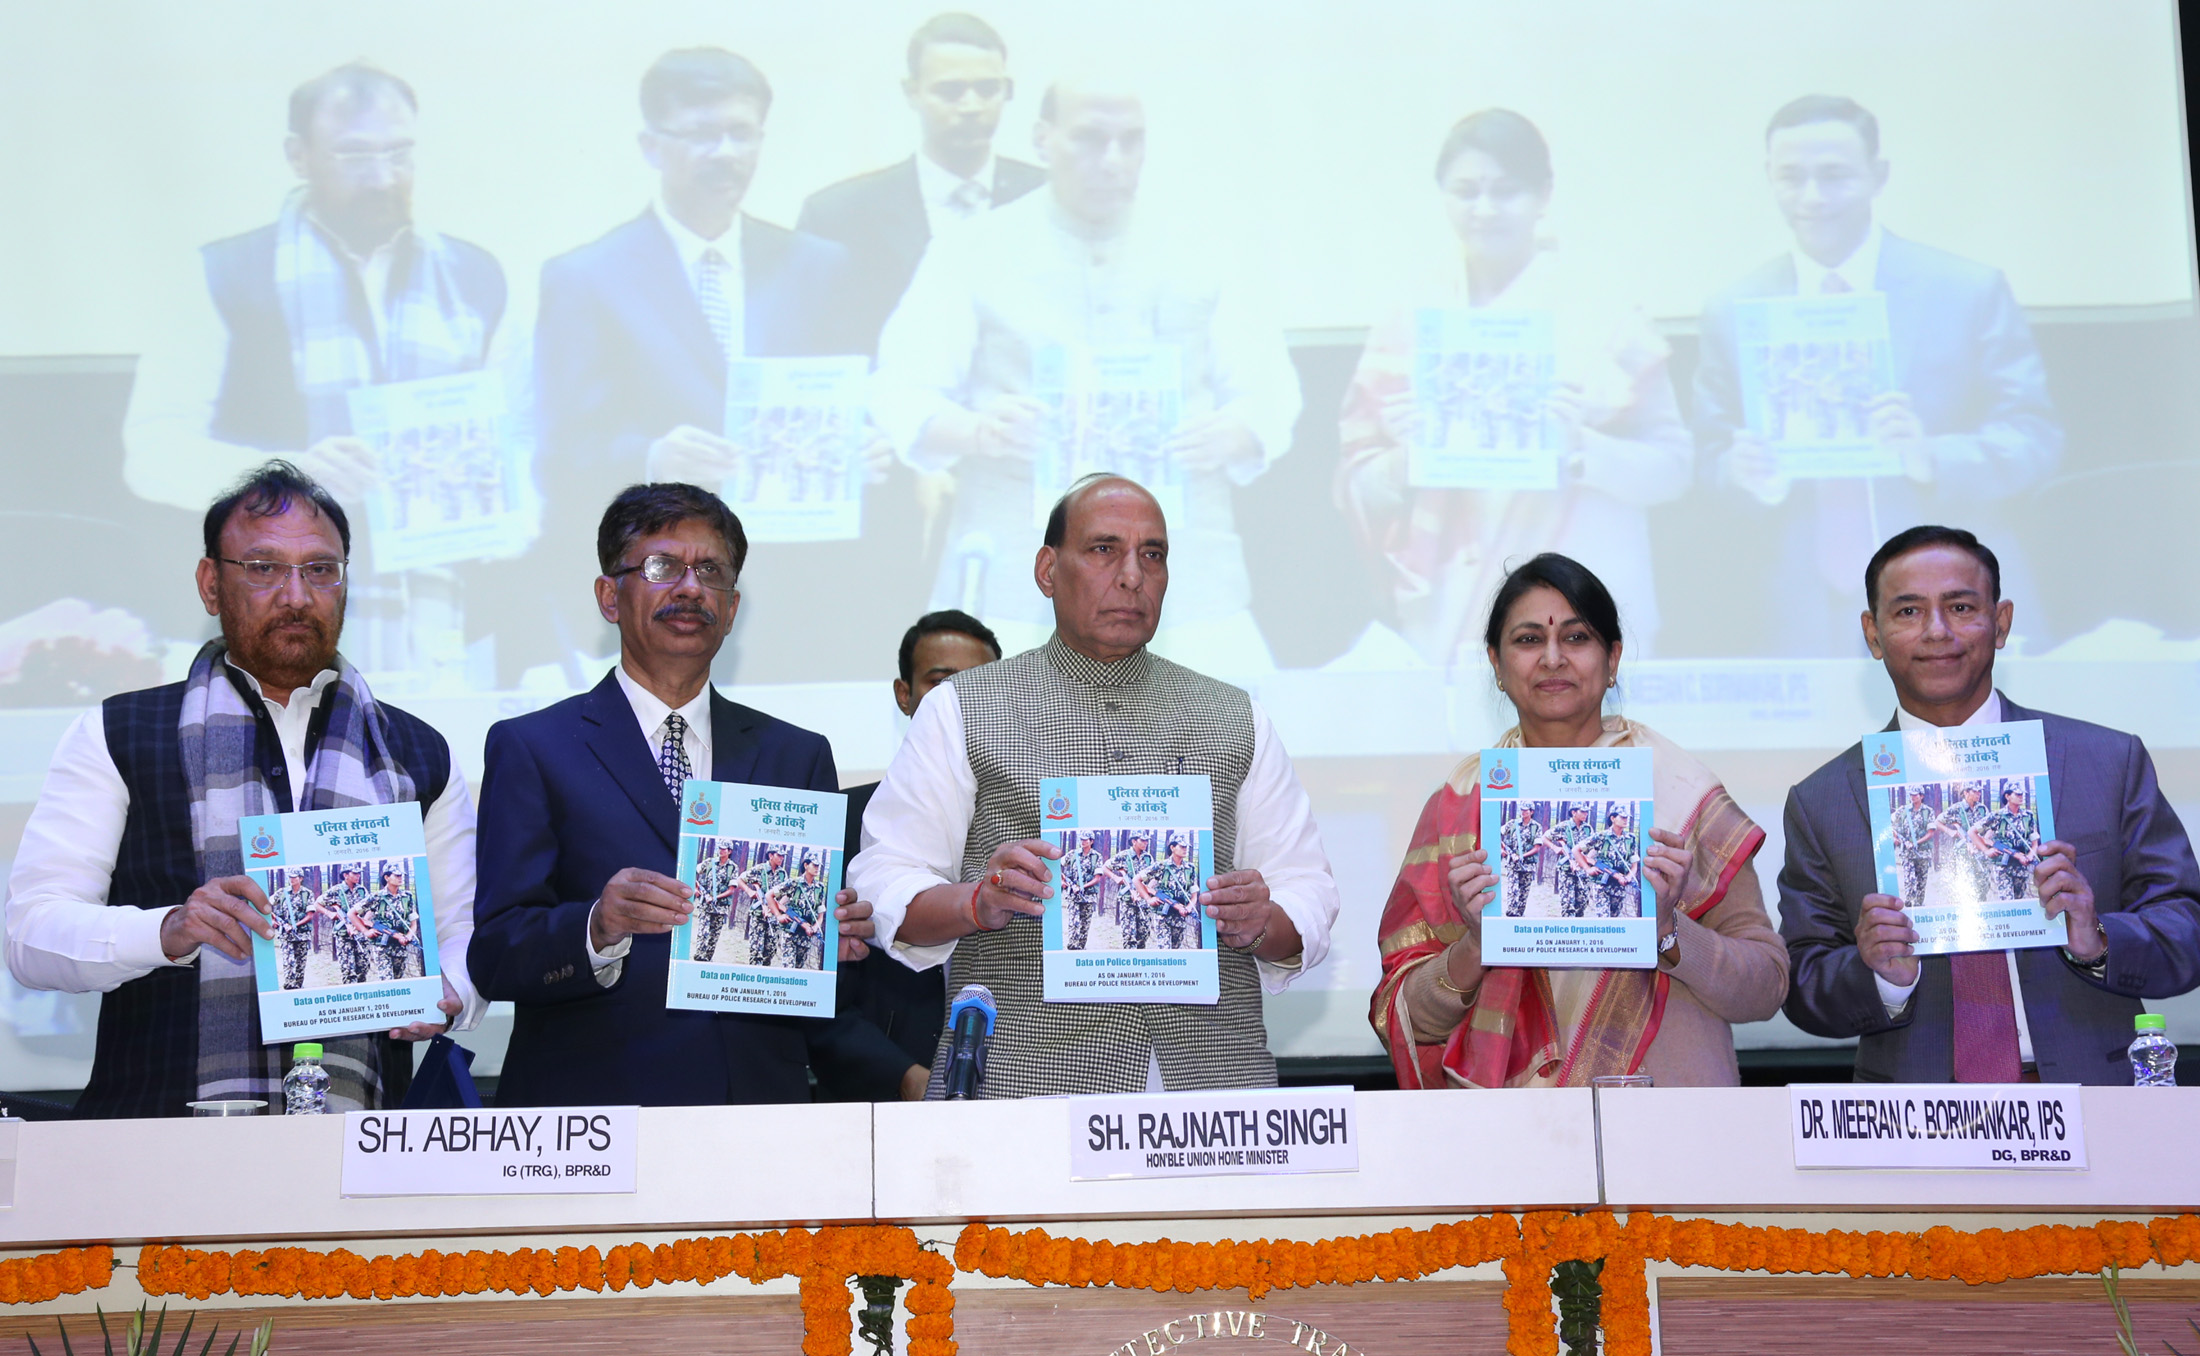 The Union Home Minister, Shri Rajnath Singh releasing a BPR&D publication, during his visit to the CDTS campus, in Ghaziabad on December 16, 2016.